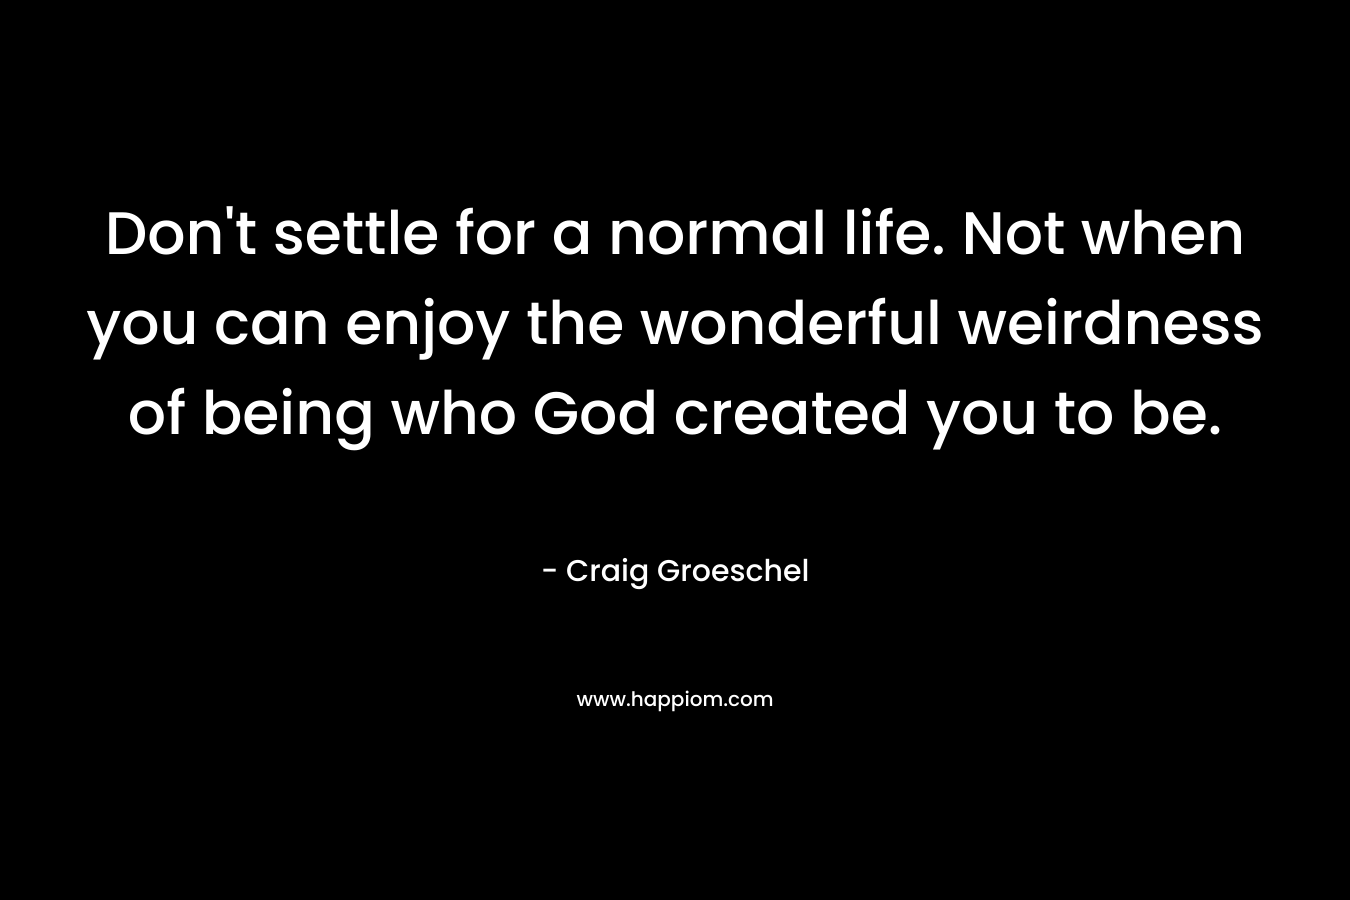 Don’t settle for a normal life. Not when you can enjoy the wonderful weirdness of being who God created you to be. – Craig Groeschel